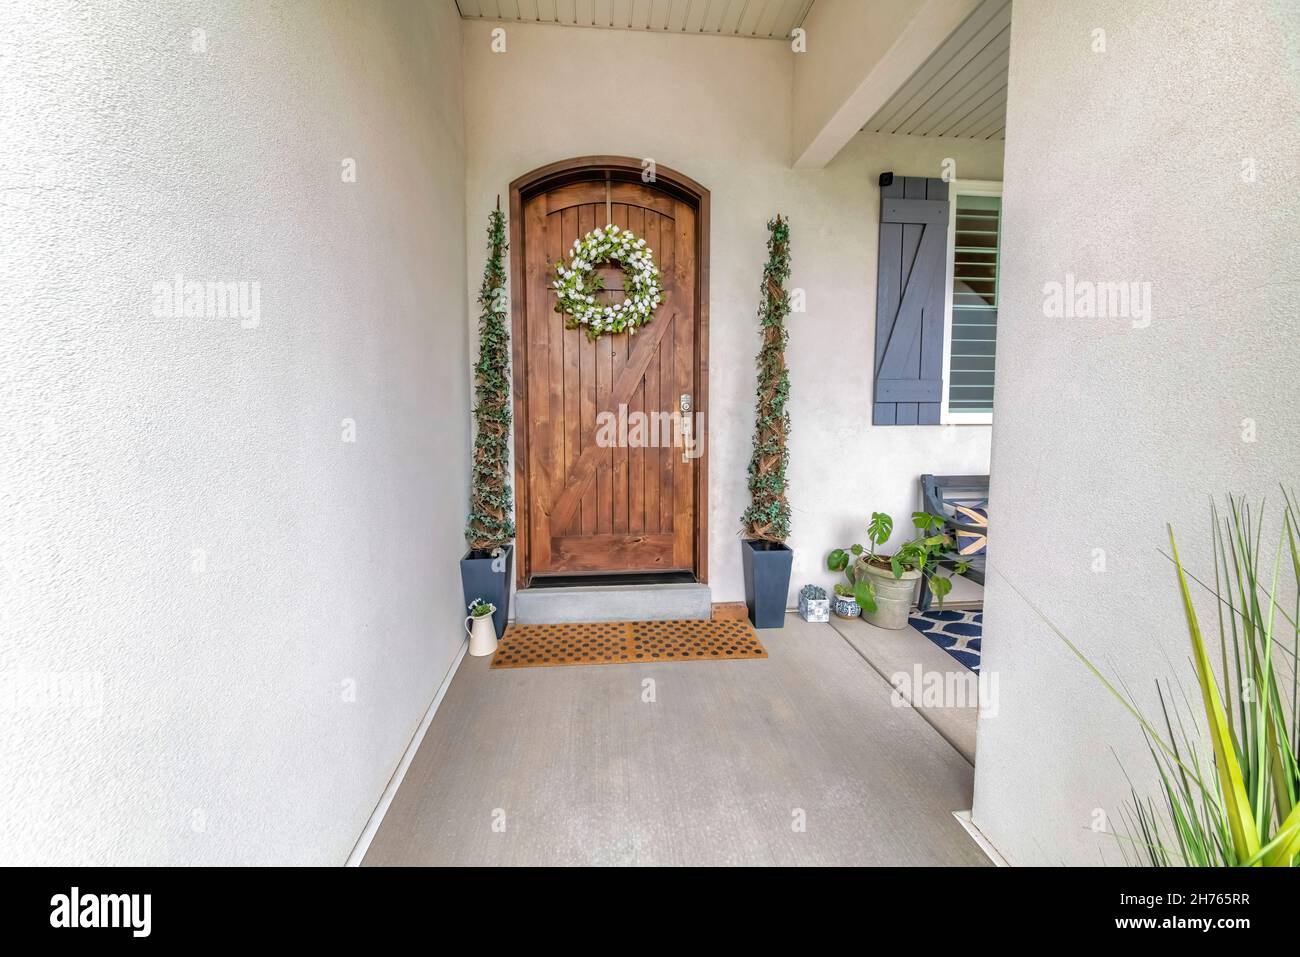 Arched wooden door with digital entry access, wreath and topiary spiral shrubs Stock Photo